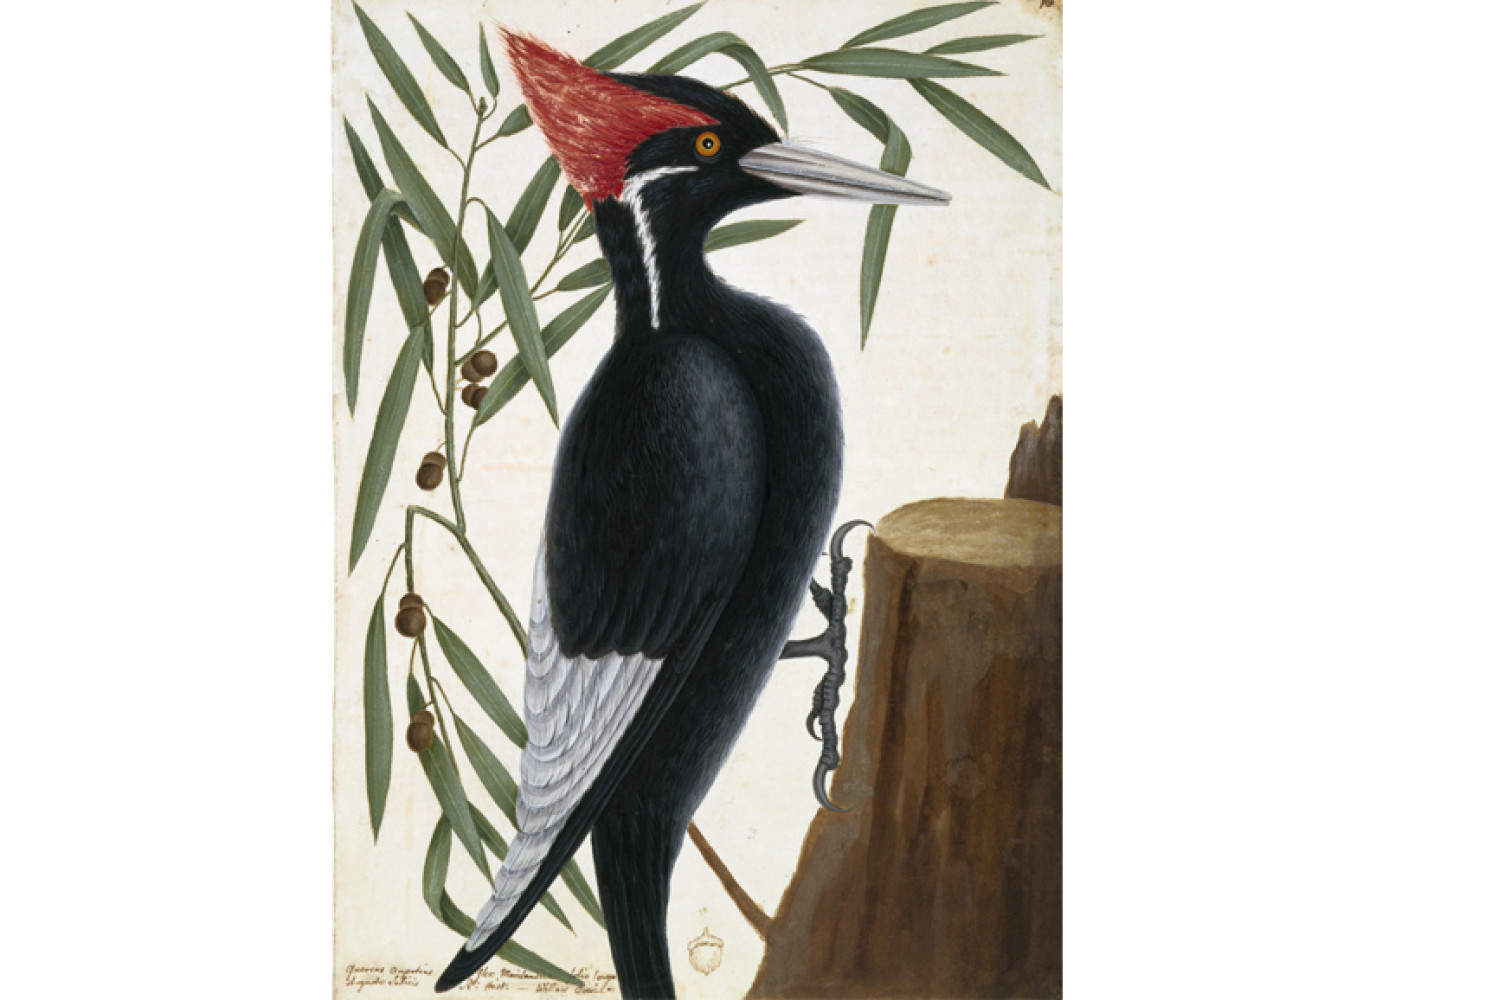 Ivory-billed woodpecker and willow oak, ca. 1722—1726, by Mark Catesby (British, 1682—1749); watercolor and bodycolor over pen and ink; Royal Collection Trust/© Her Majesty Queen Elizabeth II 2017